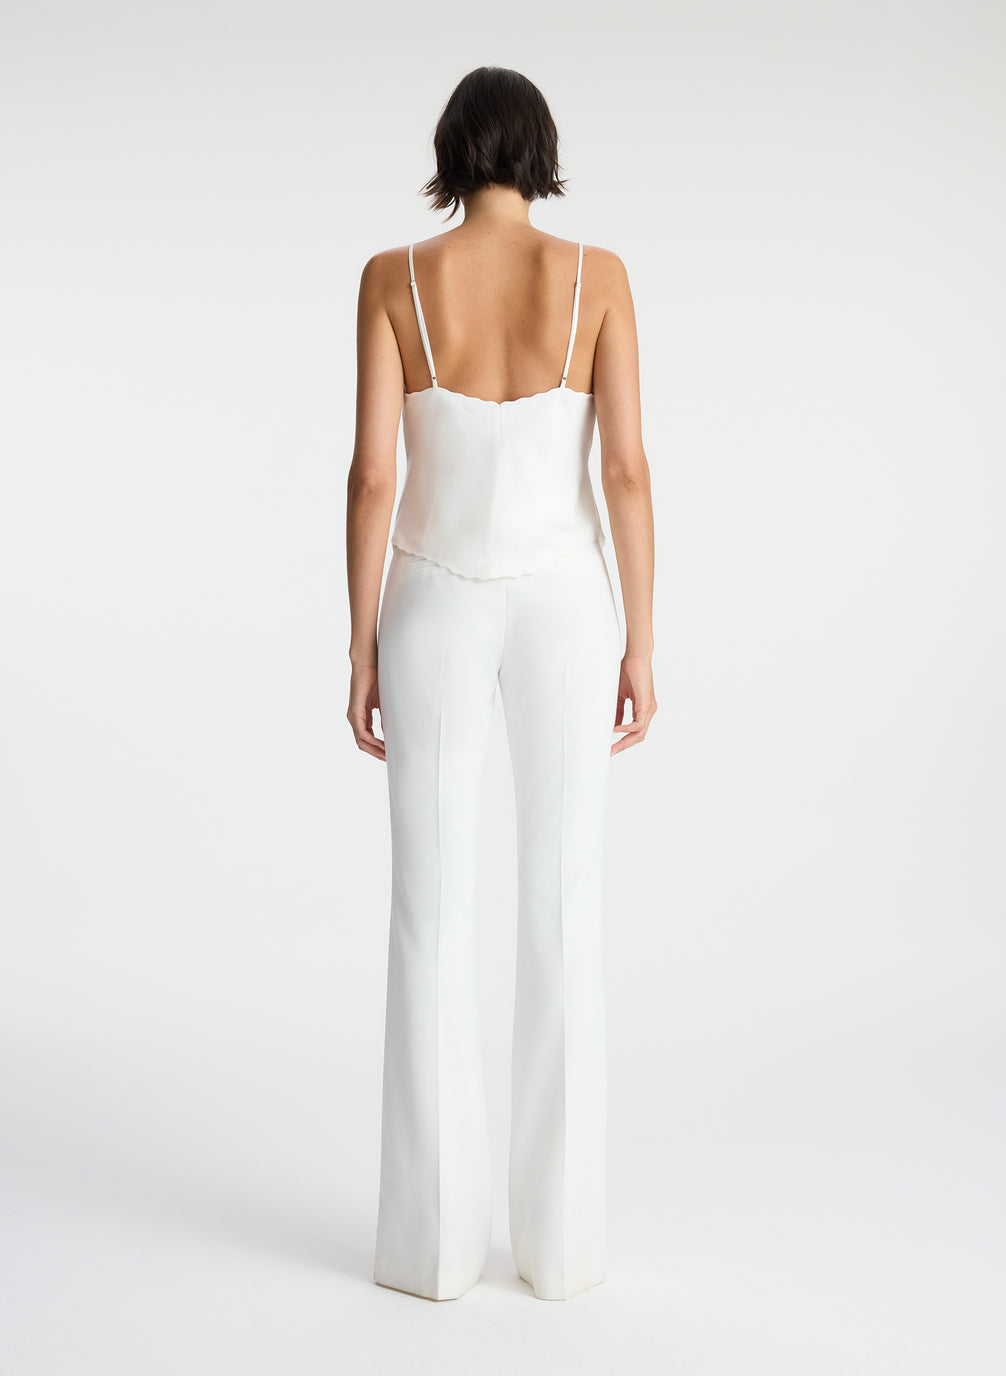 back view of woman wearing white satin camisole and white pants